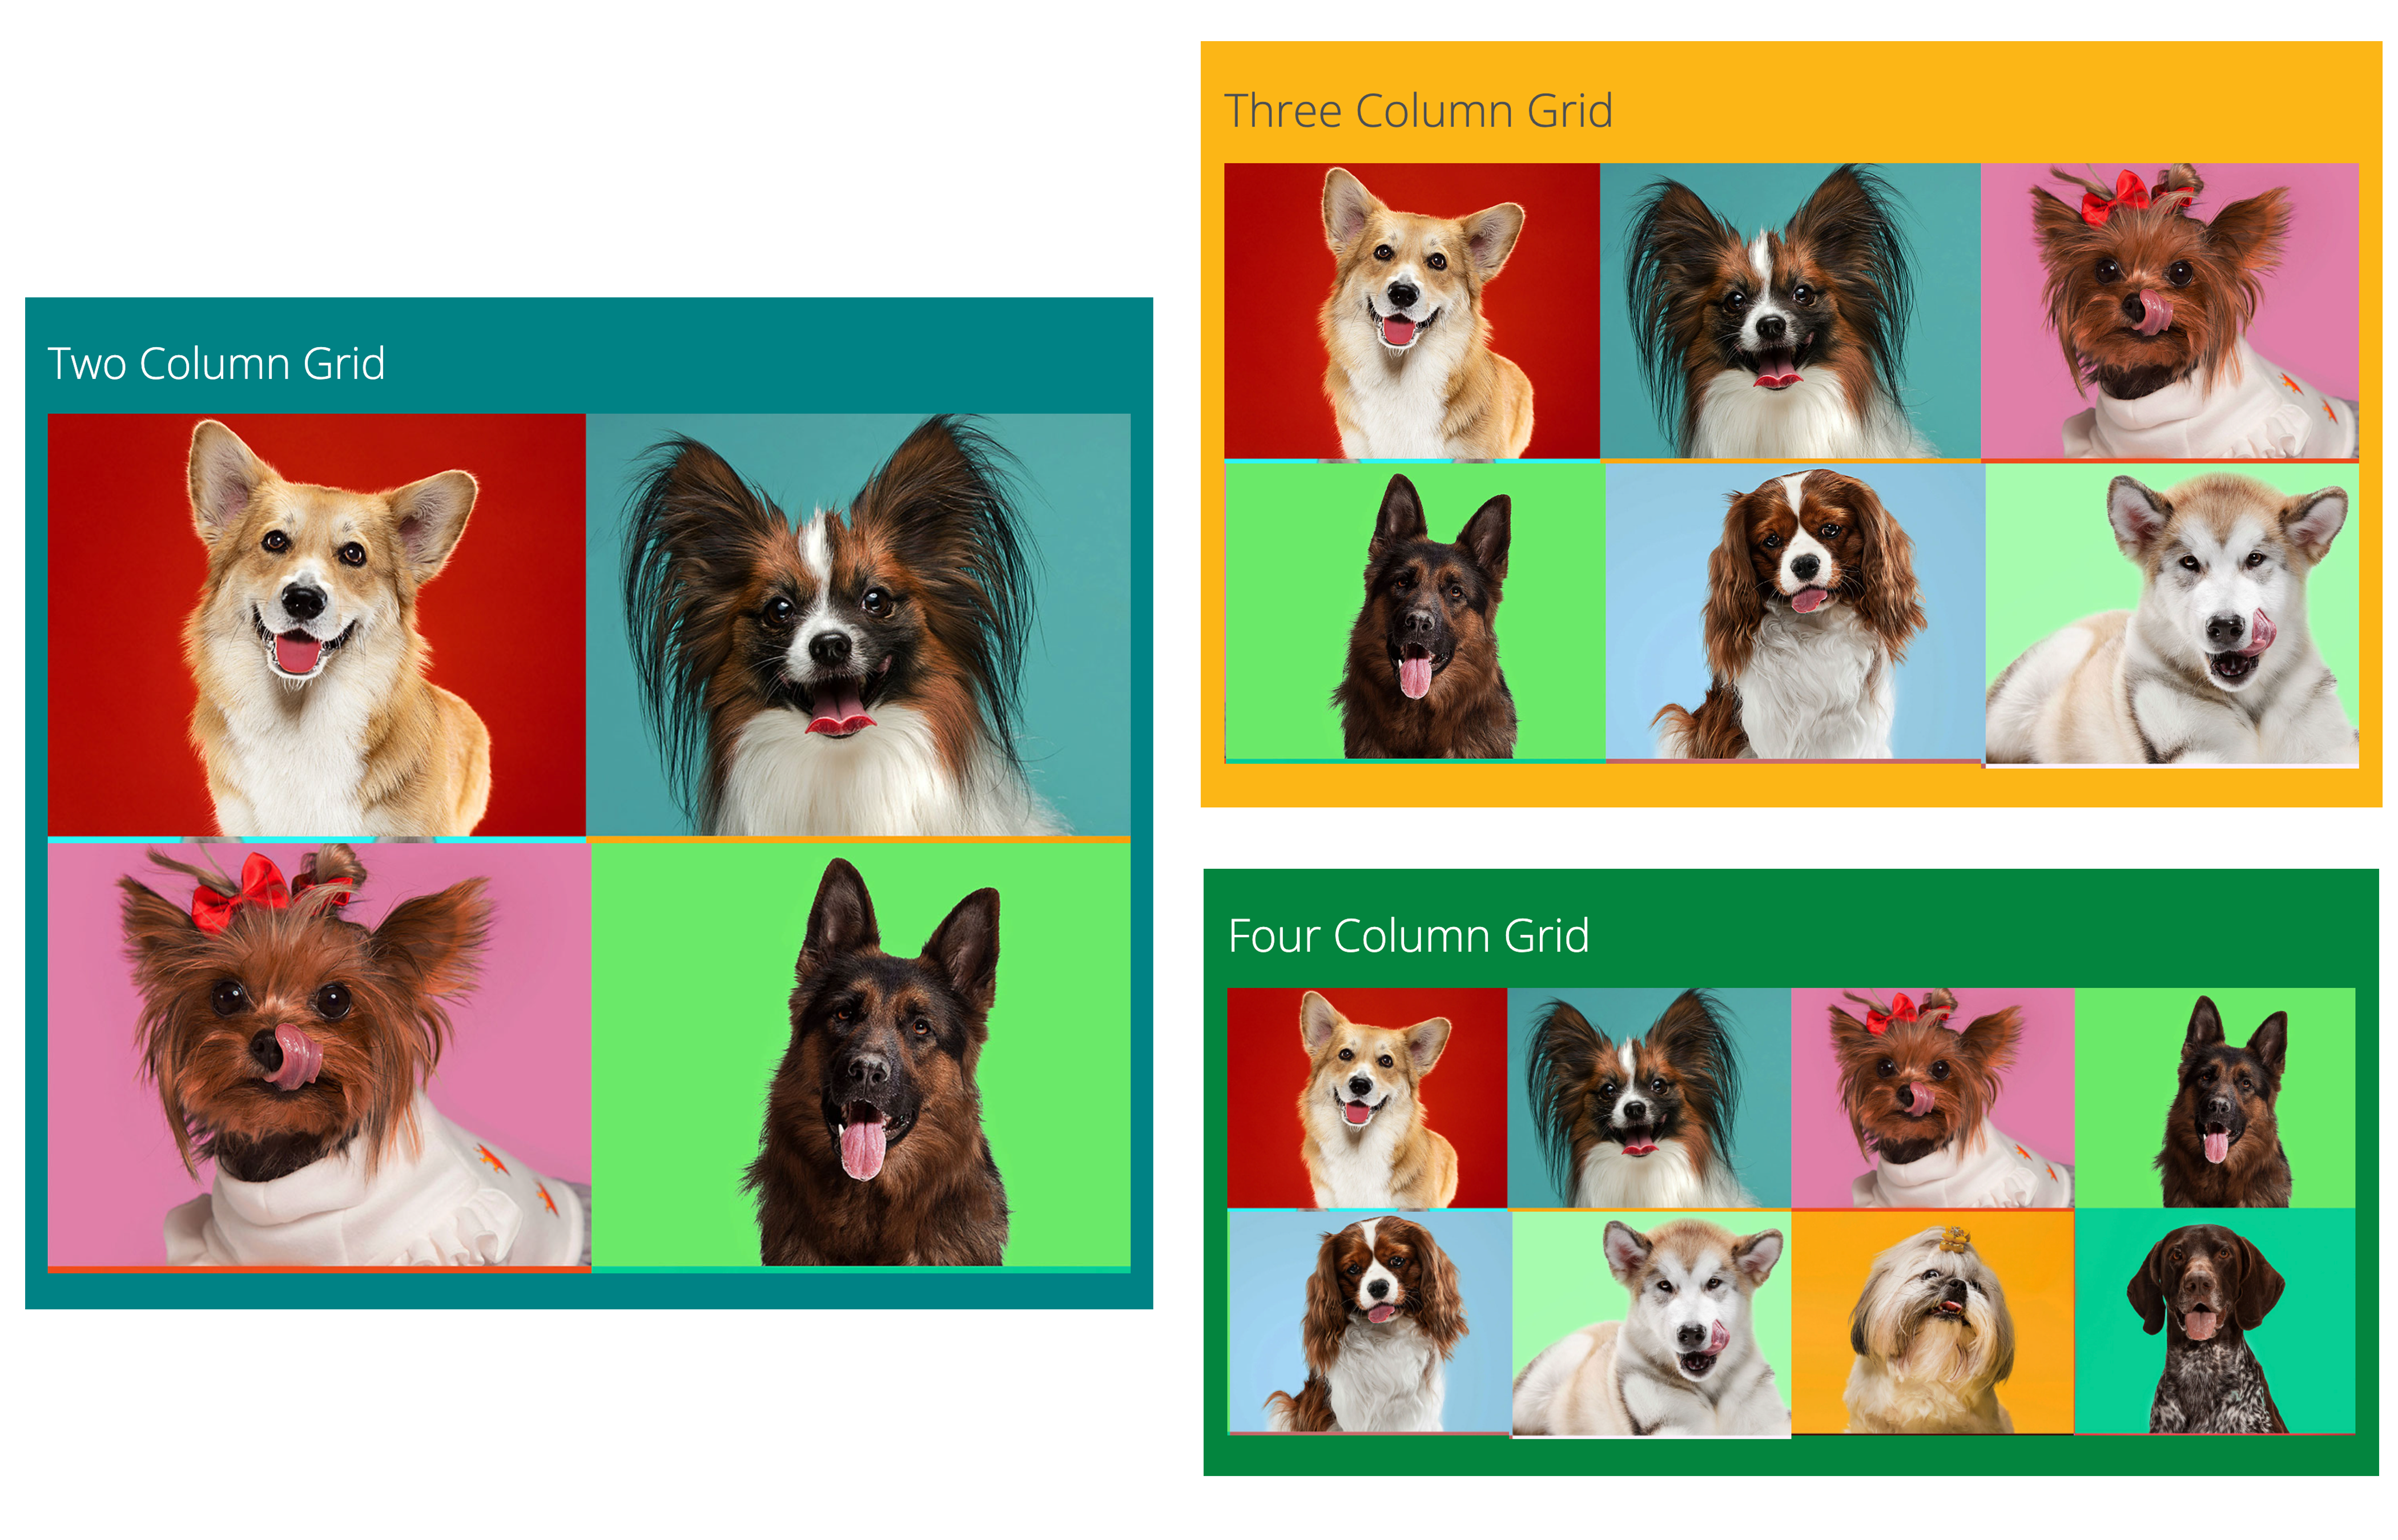 Examples of 2, 3, and 4 columns grids using puppies and kittens in each box.